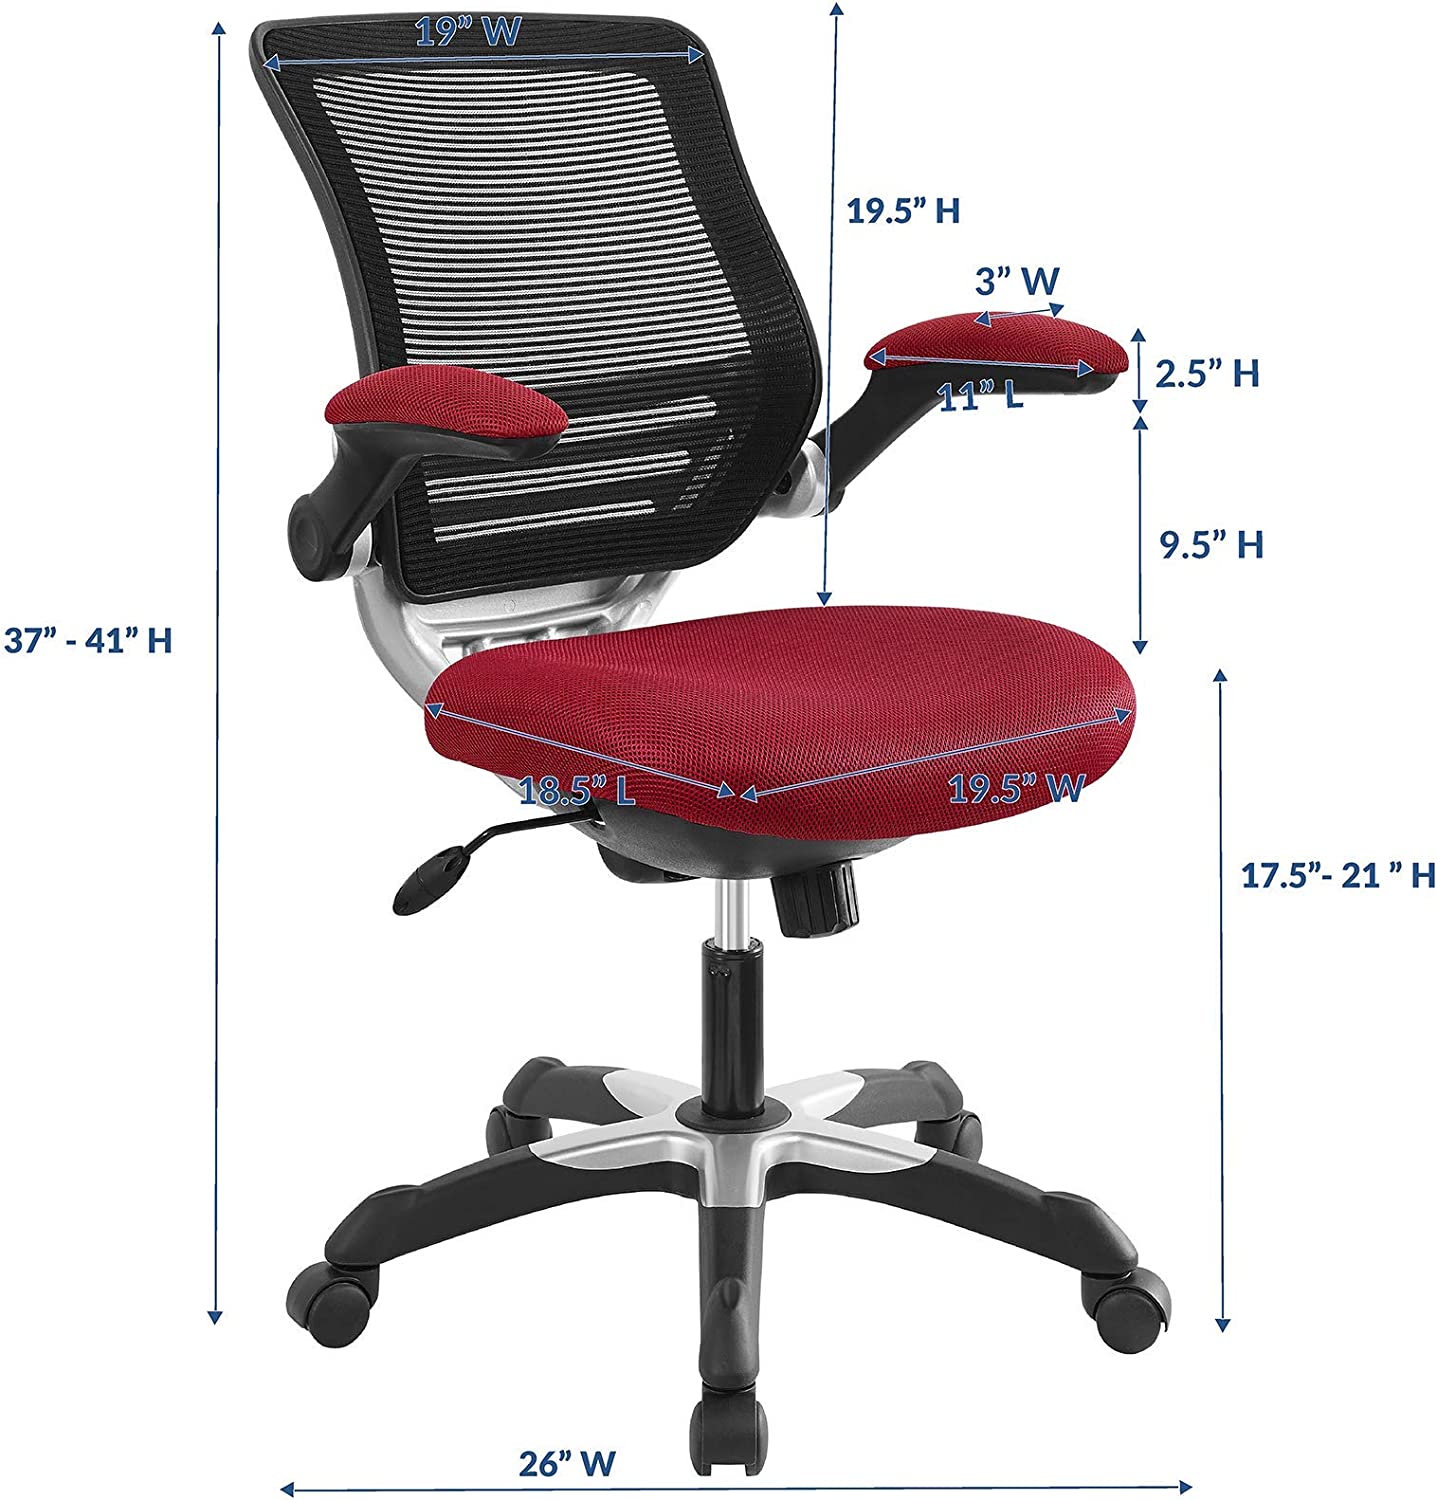 Modway Edge Mesh Back and Mesh Seat Office Chair In Black With Flip-Up Arms in Black